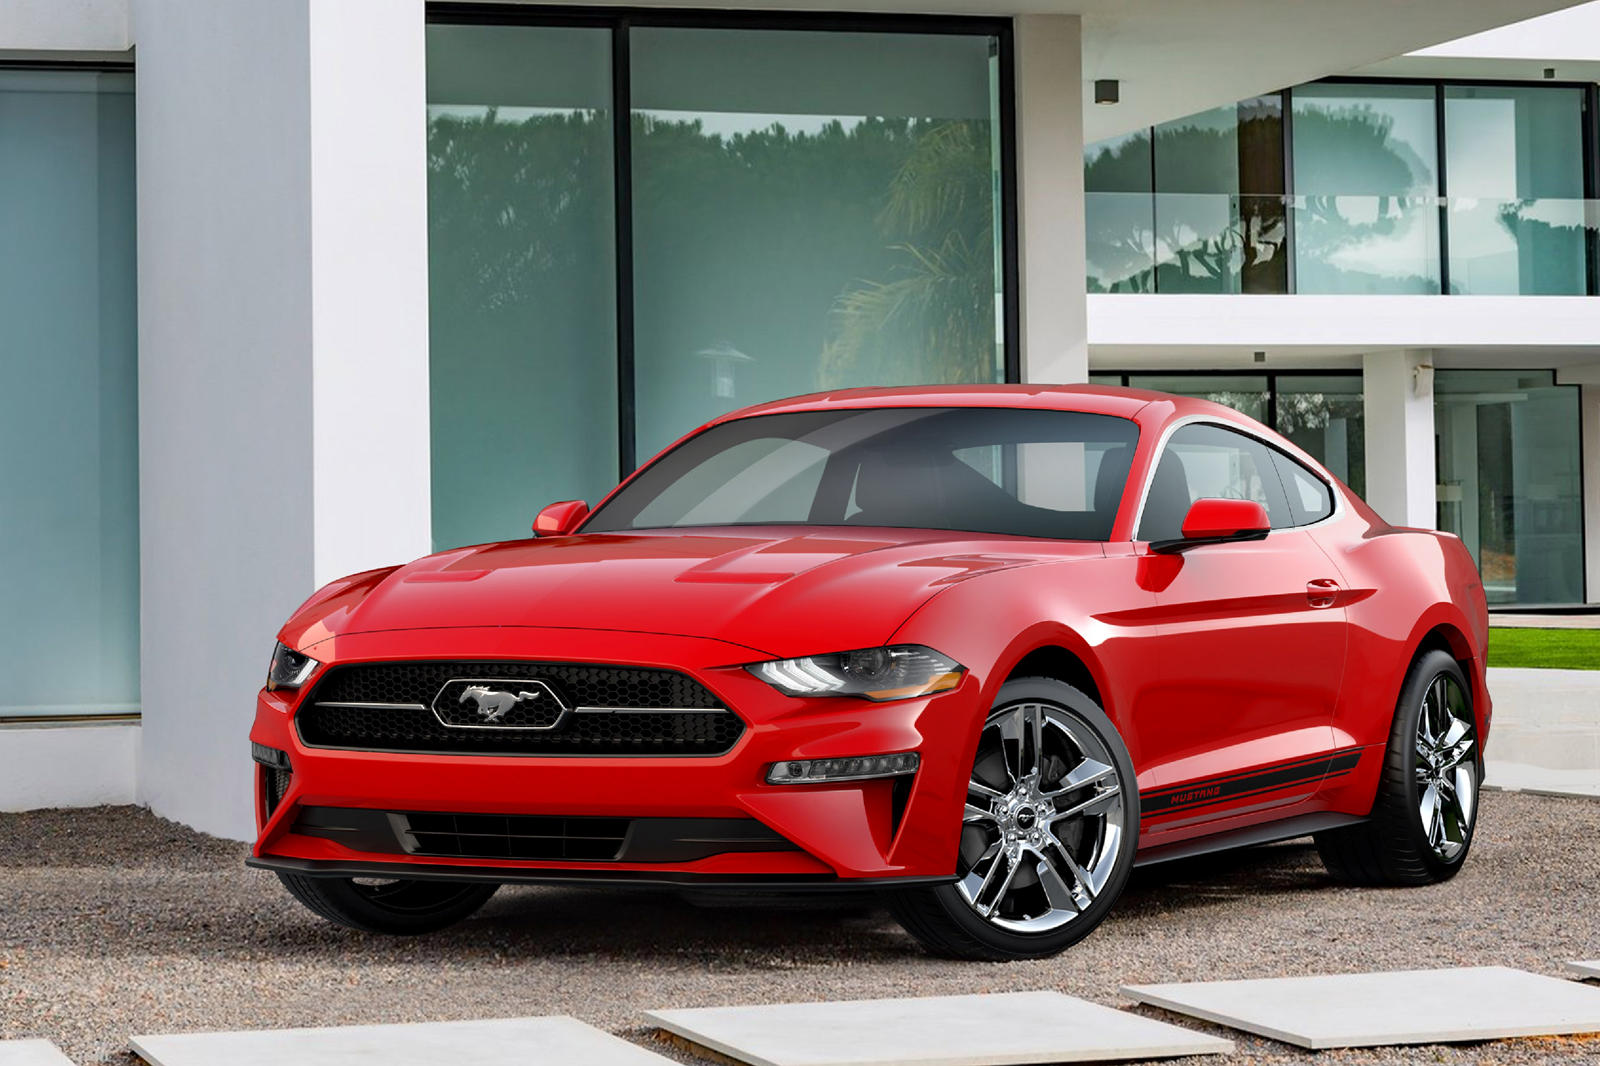 2022 Ford Mustang Prices, Reviews, and Photos - MotorTrend